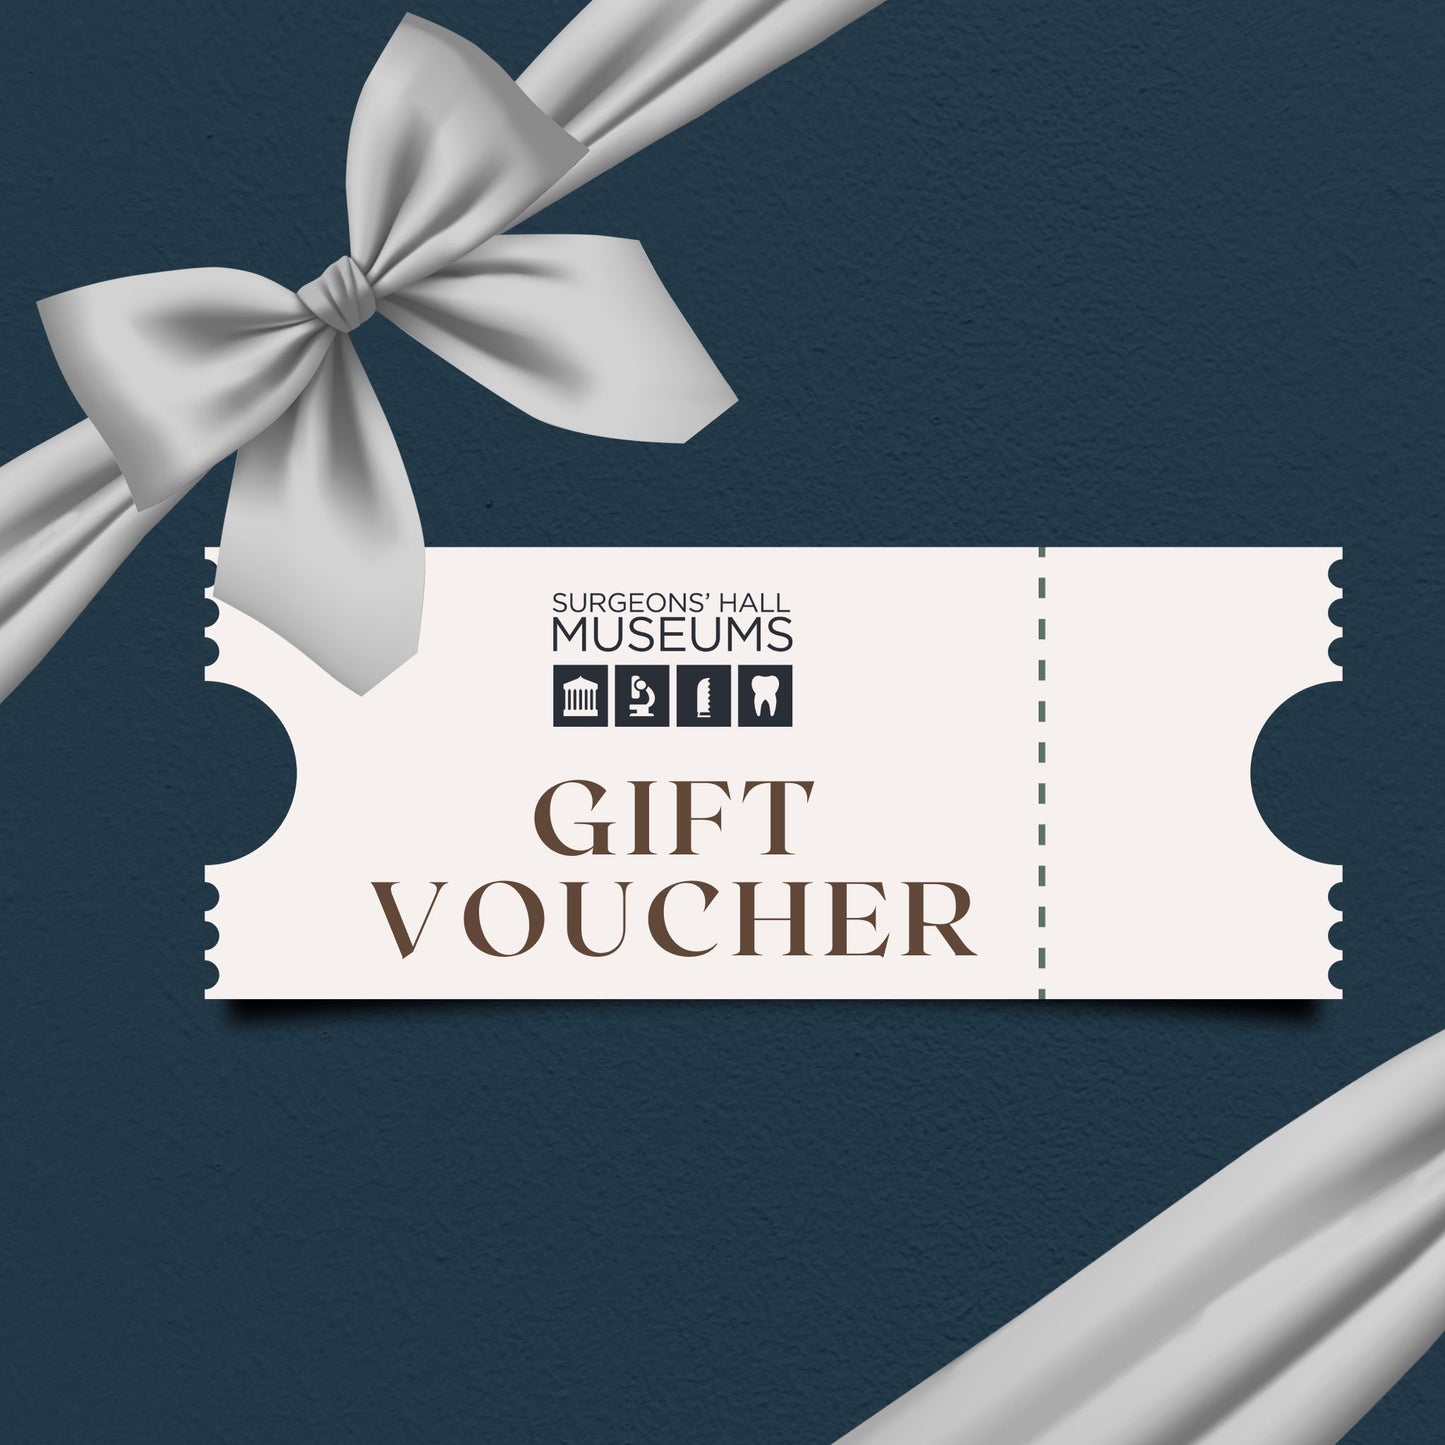 Surgeons' Hall Museums Gift Voucher